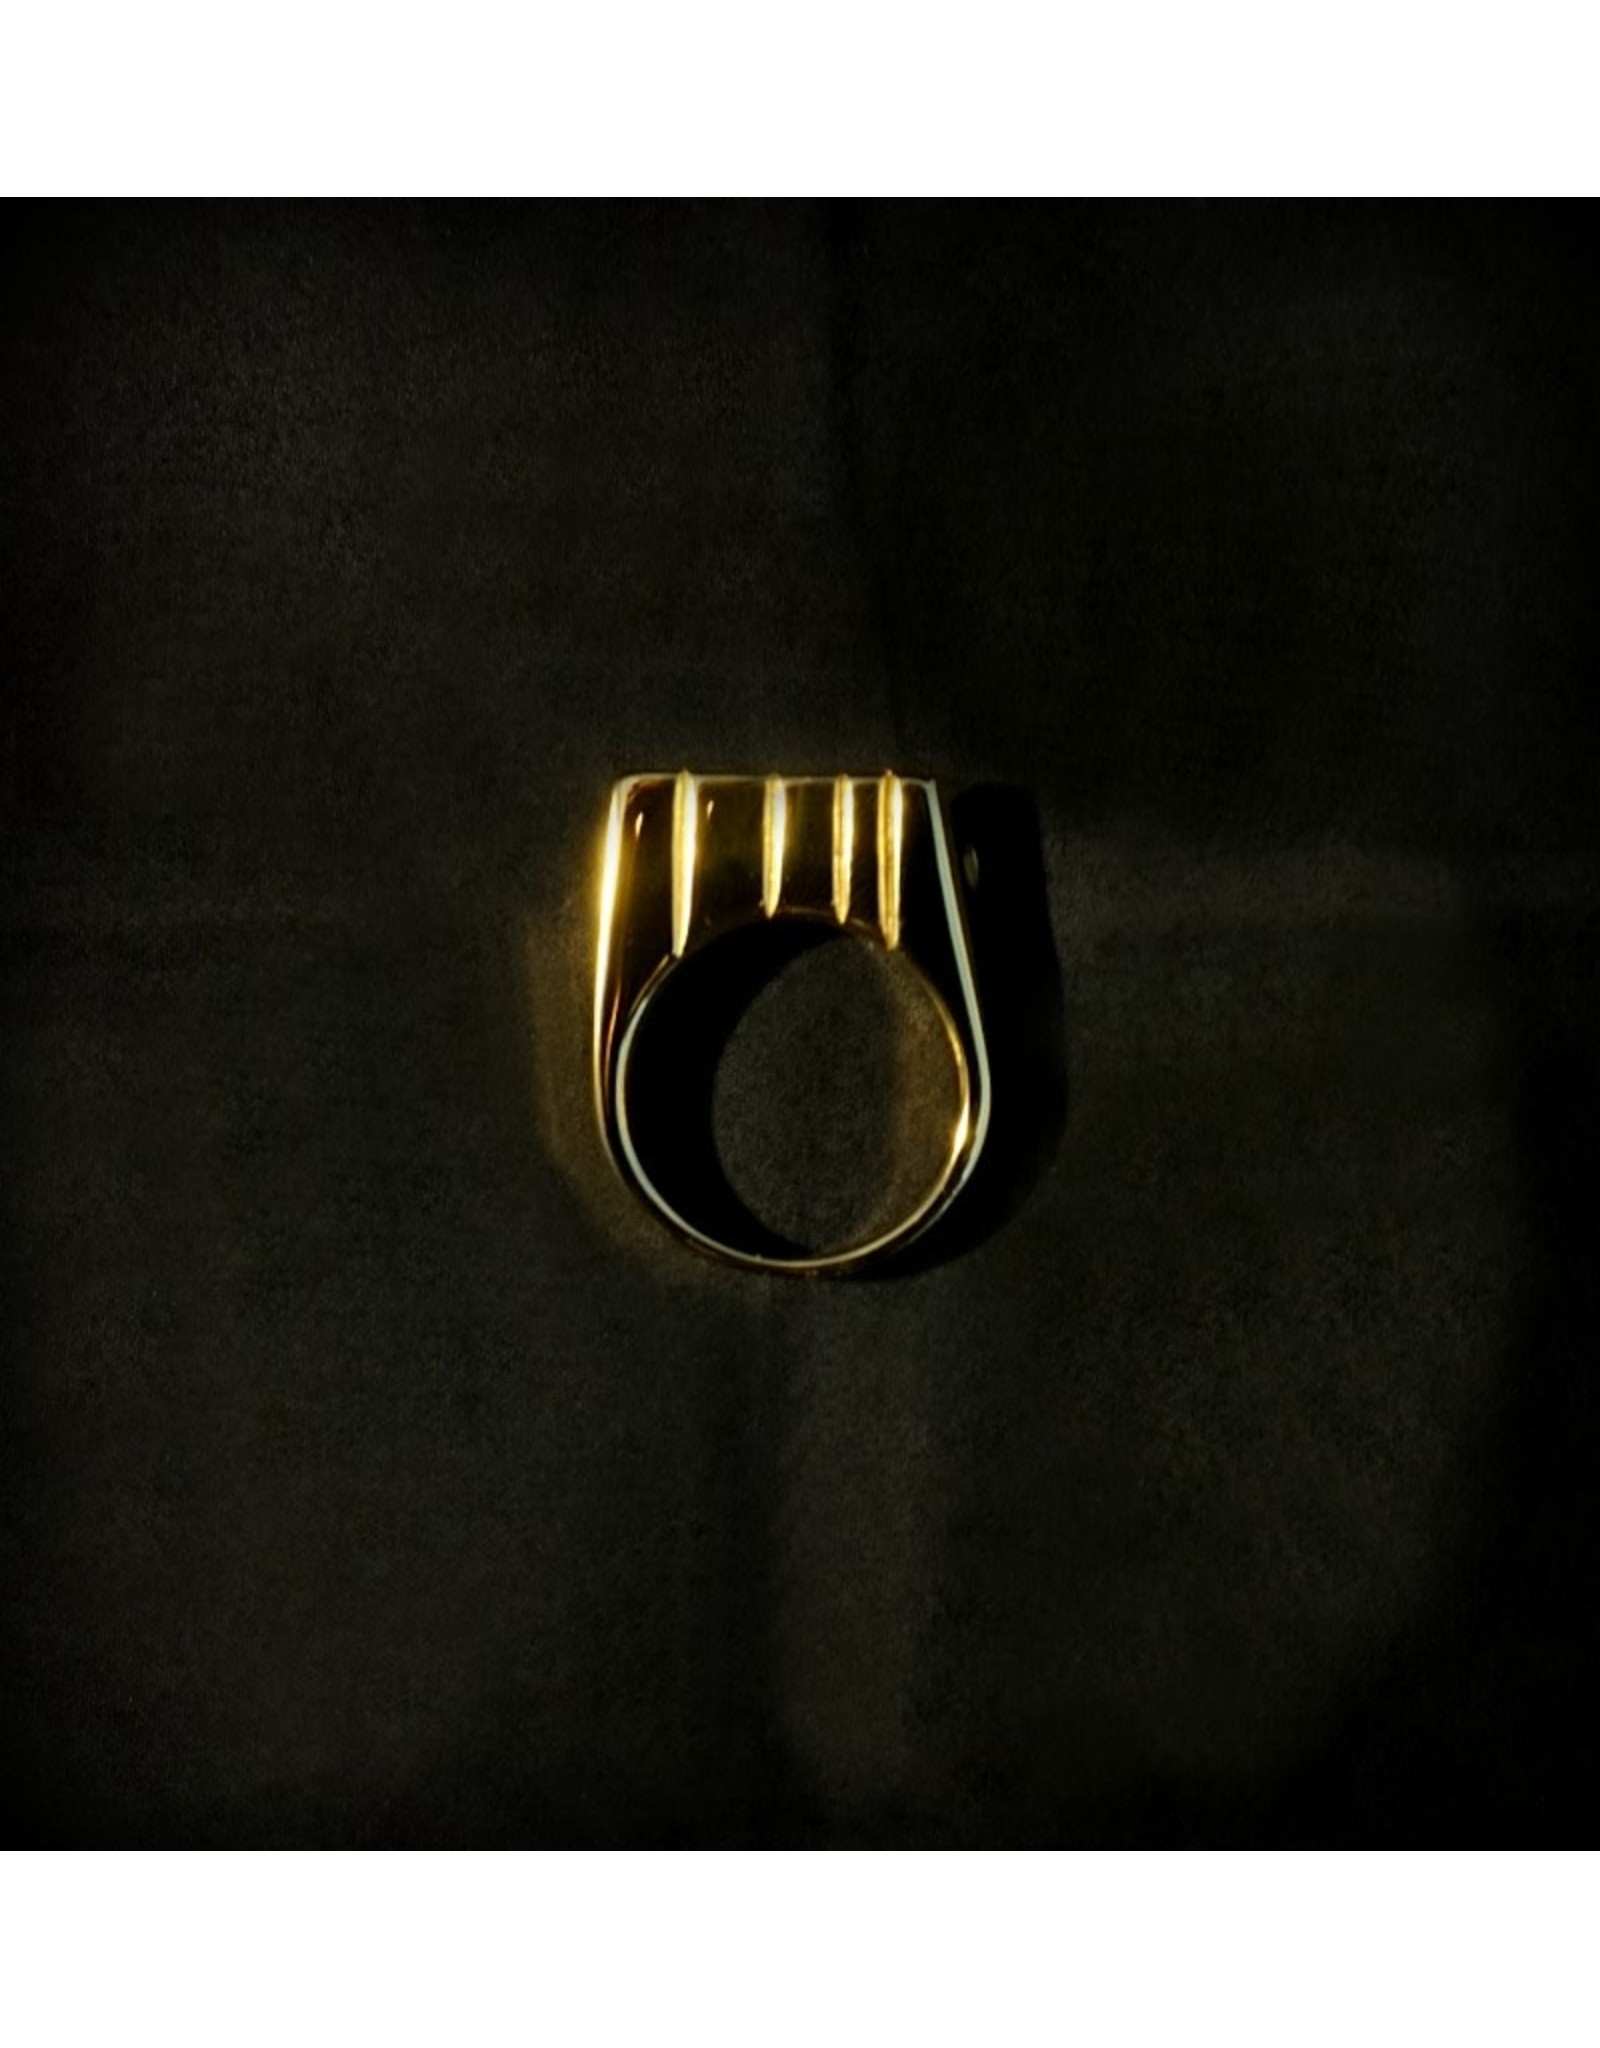 Raw Raw Smoker Ring with Gold Finish - Size 12